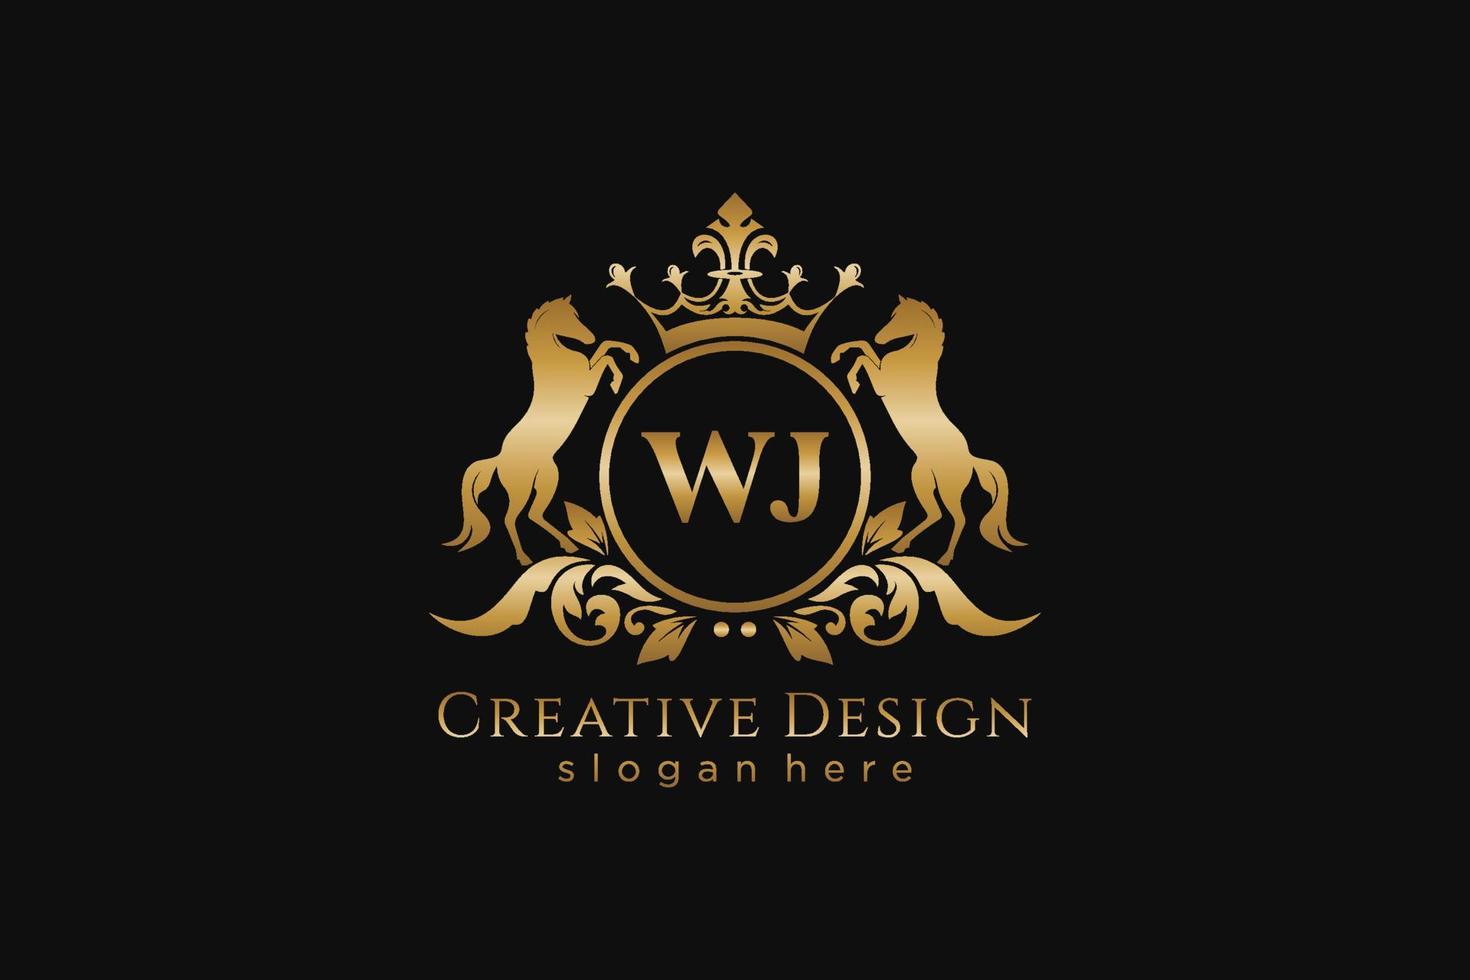 initial WJ Retro golden crest with circle and two horses, badge template with scrolls and royal crown - perfect for luxurious branding projects vector